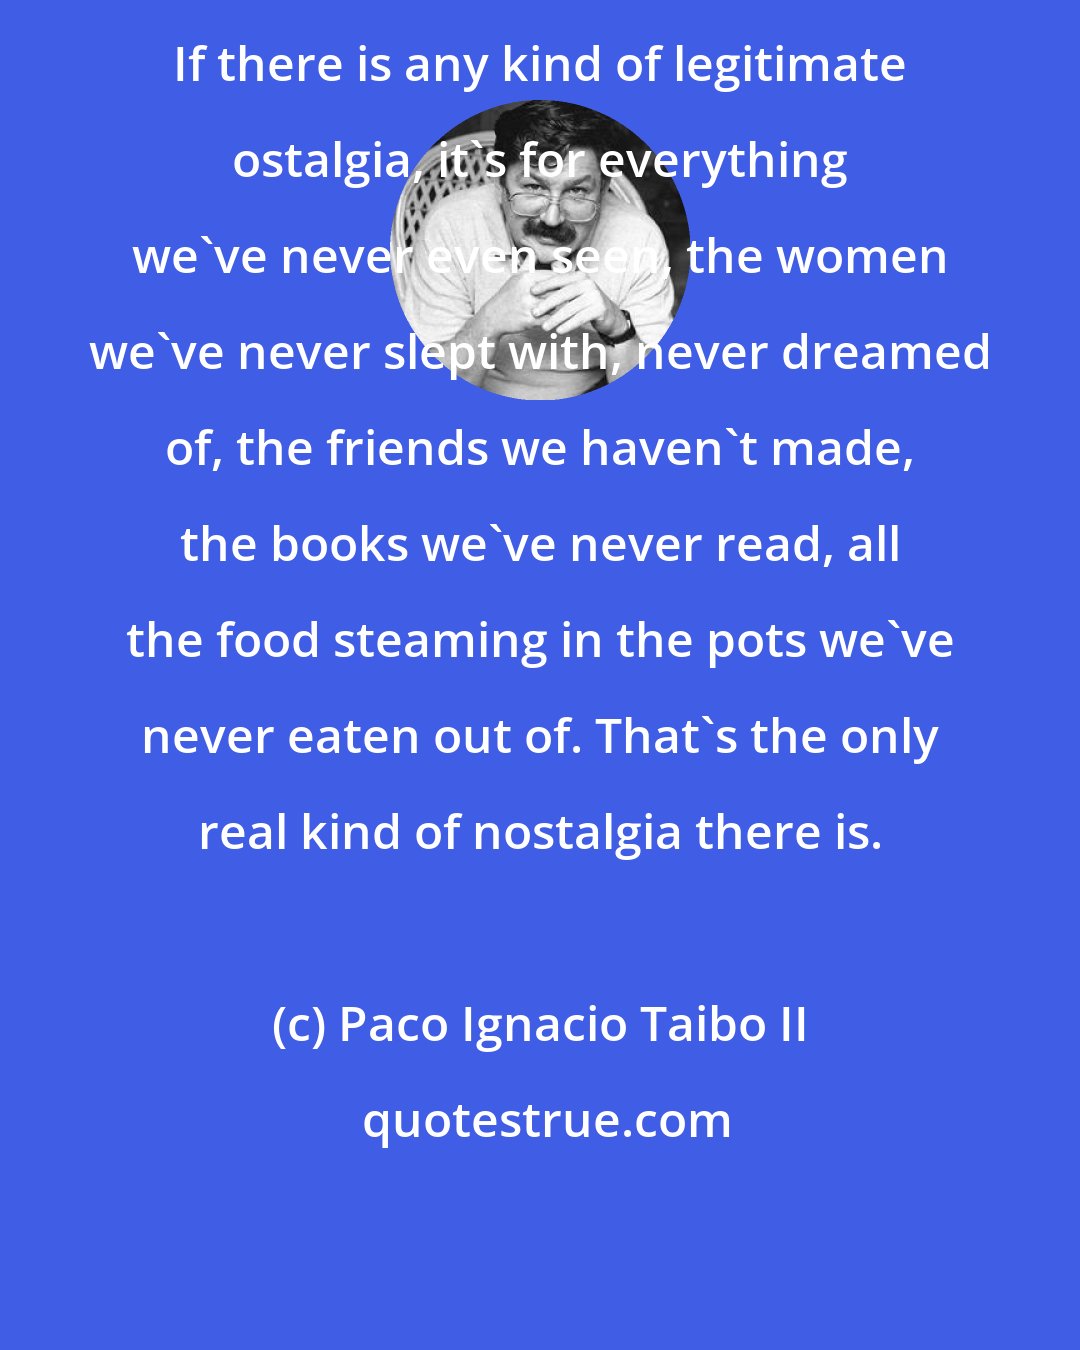 Paco Ignacio Taibo II: If there is any kind of legitimate ostalgia, it's for everything we've never even seen, the women we've never slept with, never dreamed of, the friends we haven't made, the books we've never read, all the food steaming in the pots we've never eaten out of. That's the only real kind of nostalgia there is.